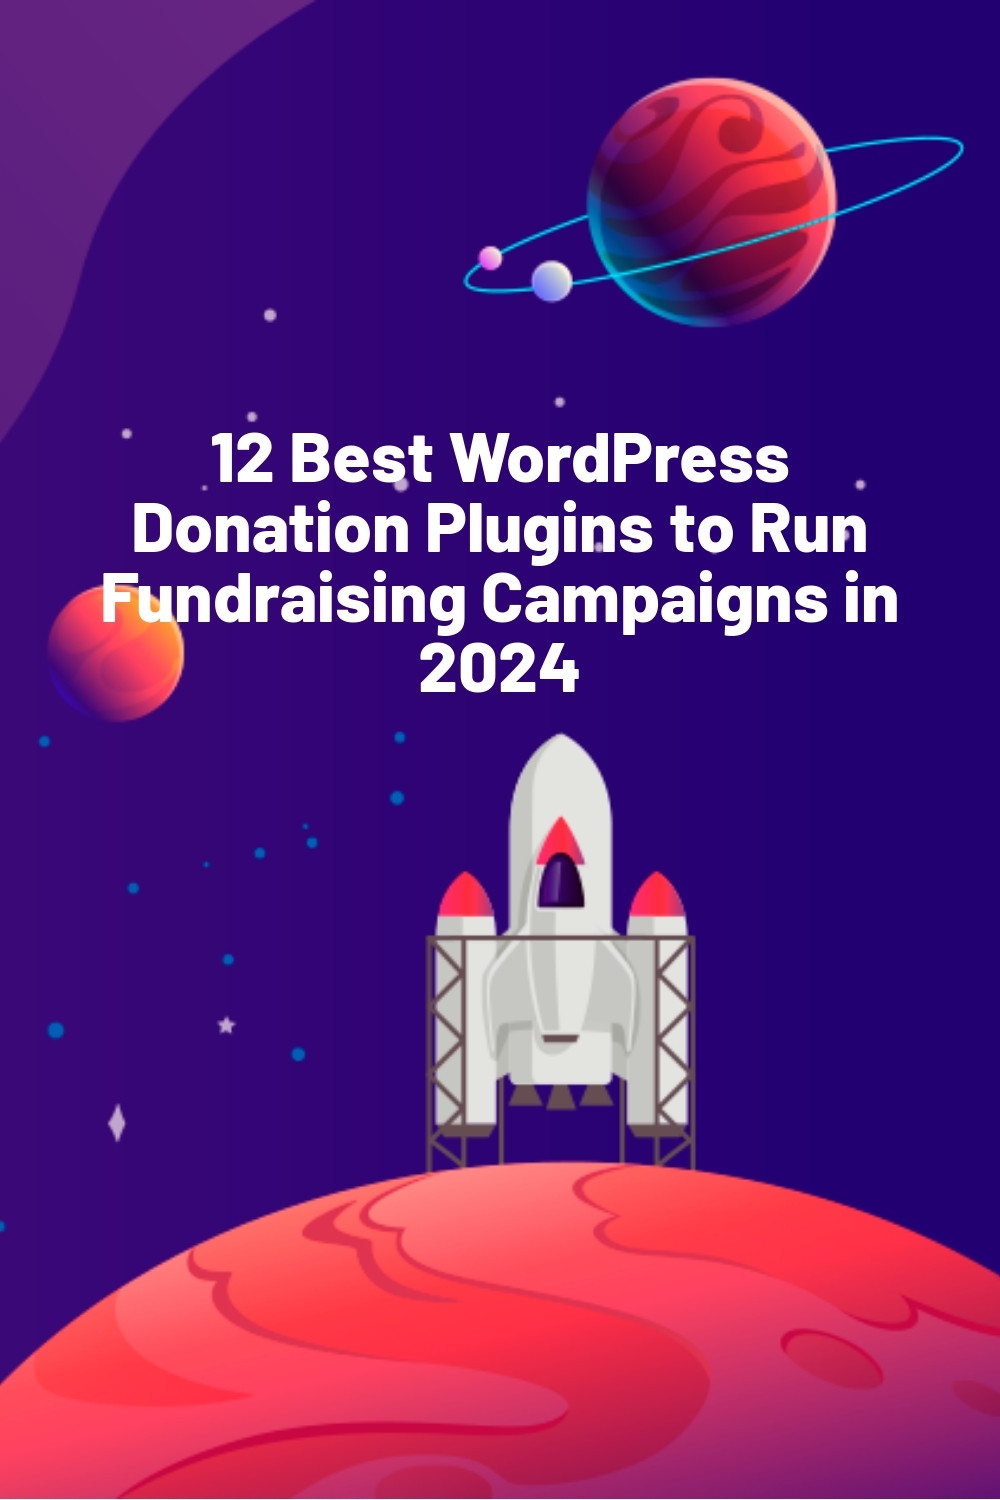 12 Best WordPress Donation Plugins to Run Fundraising Campaigns in 2024